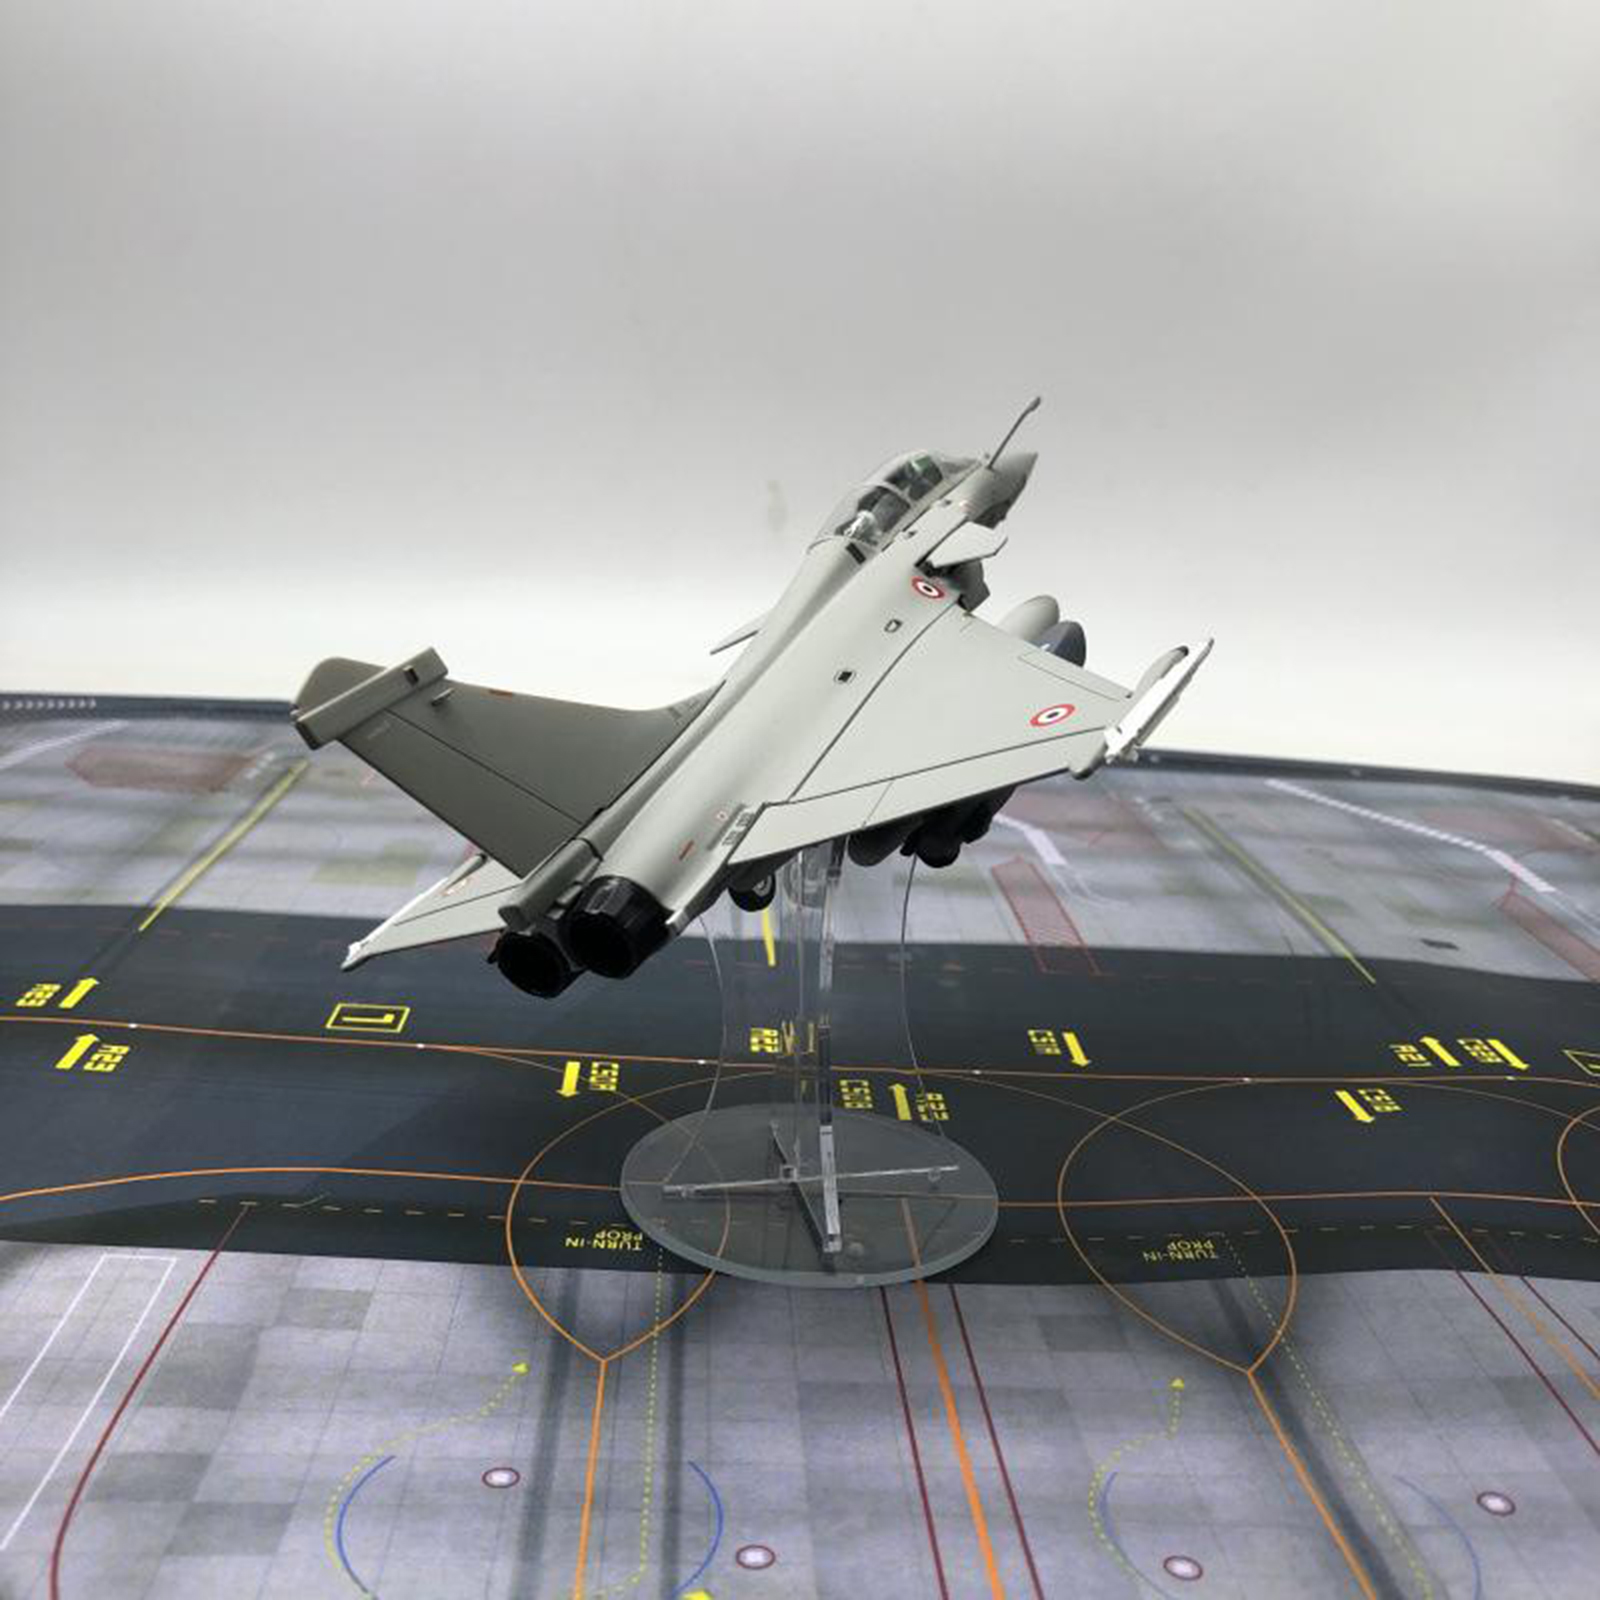 1/72 Diecast Model Scale Dassault Rafale France Fighter Aircraft Decoration New 